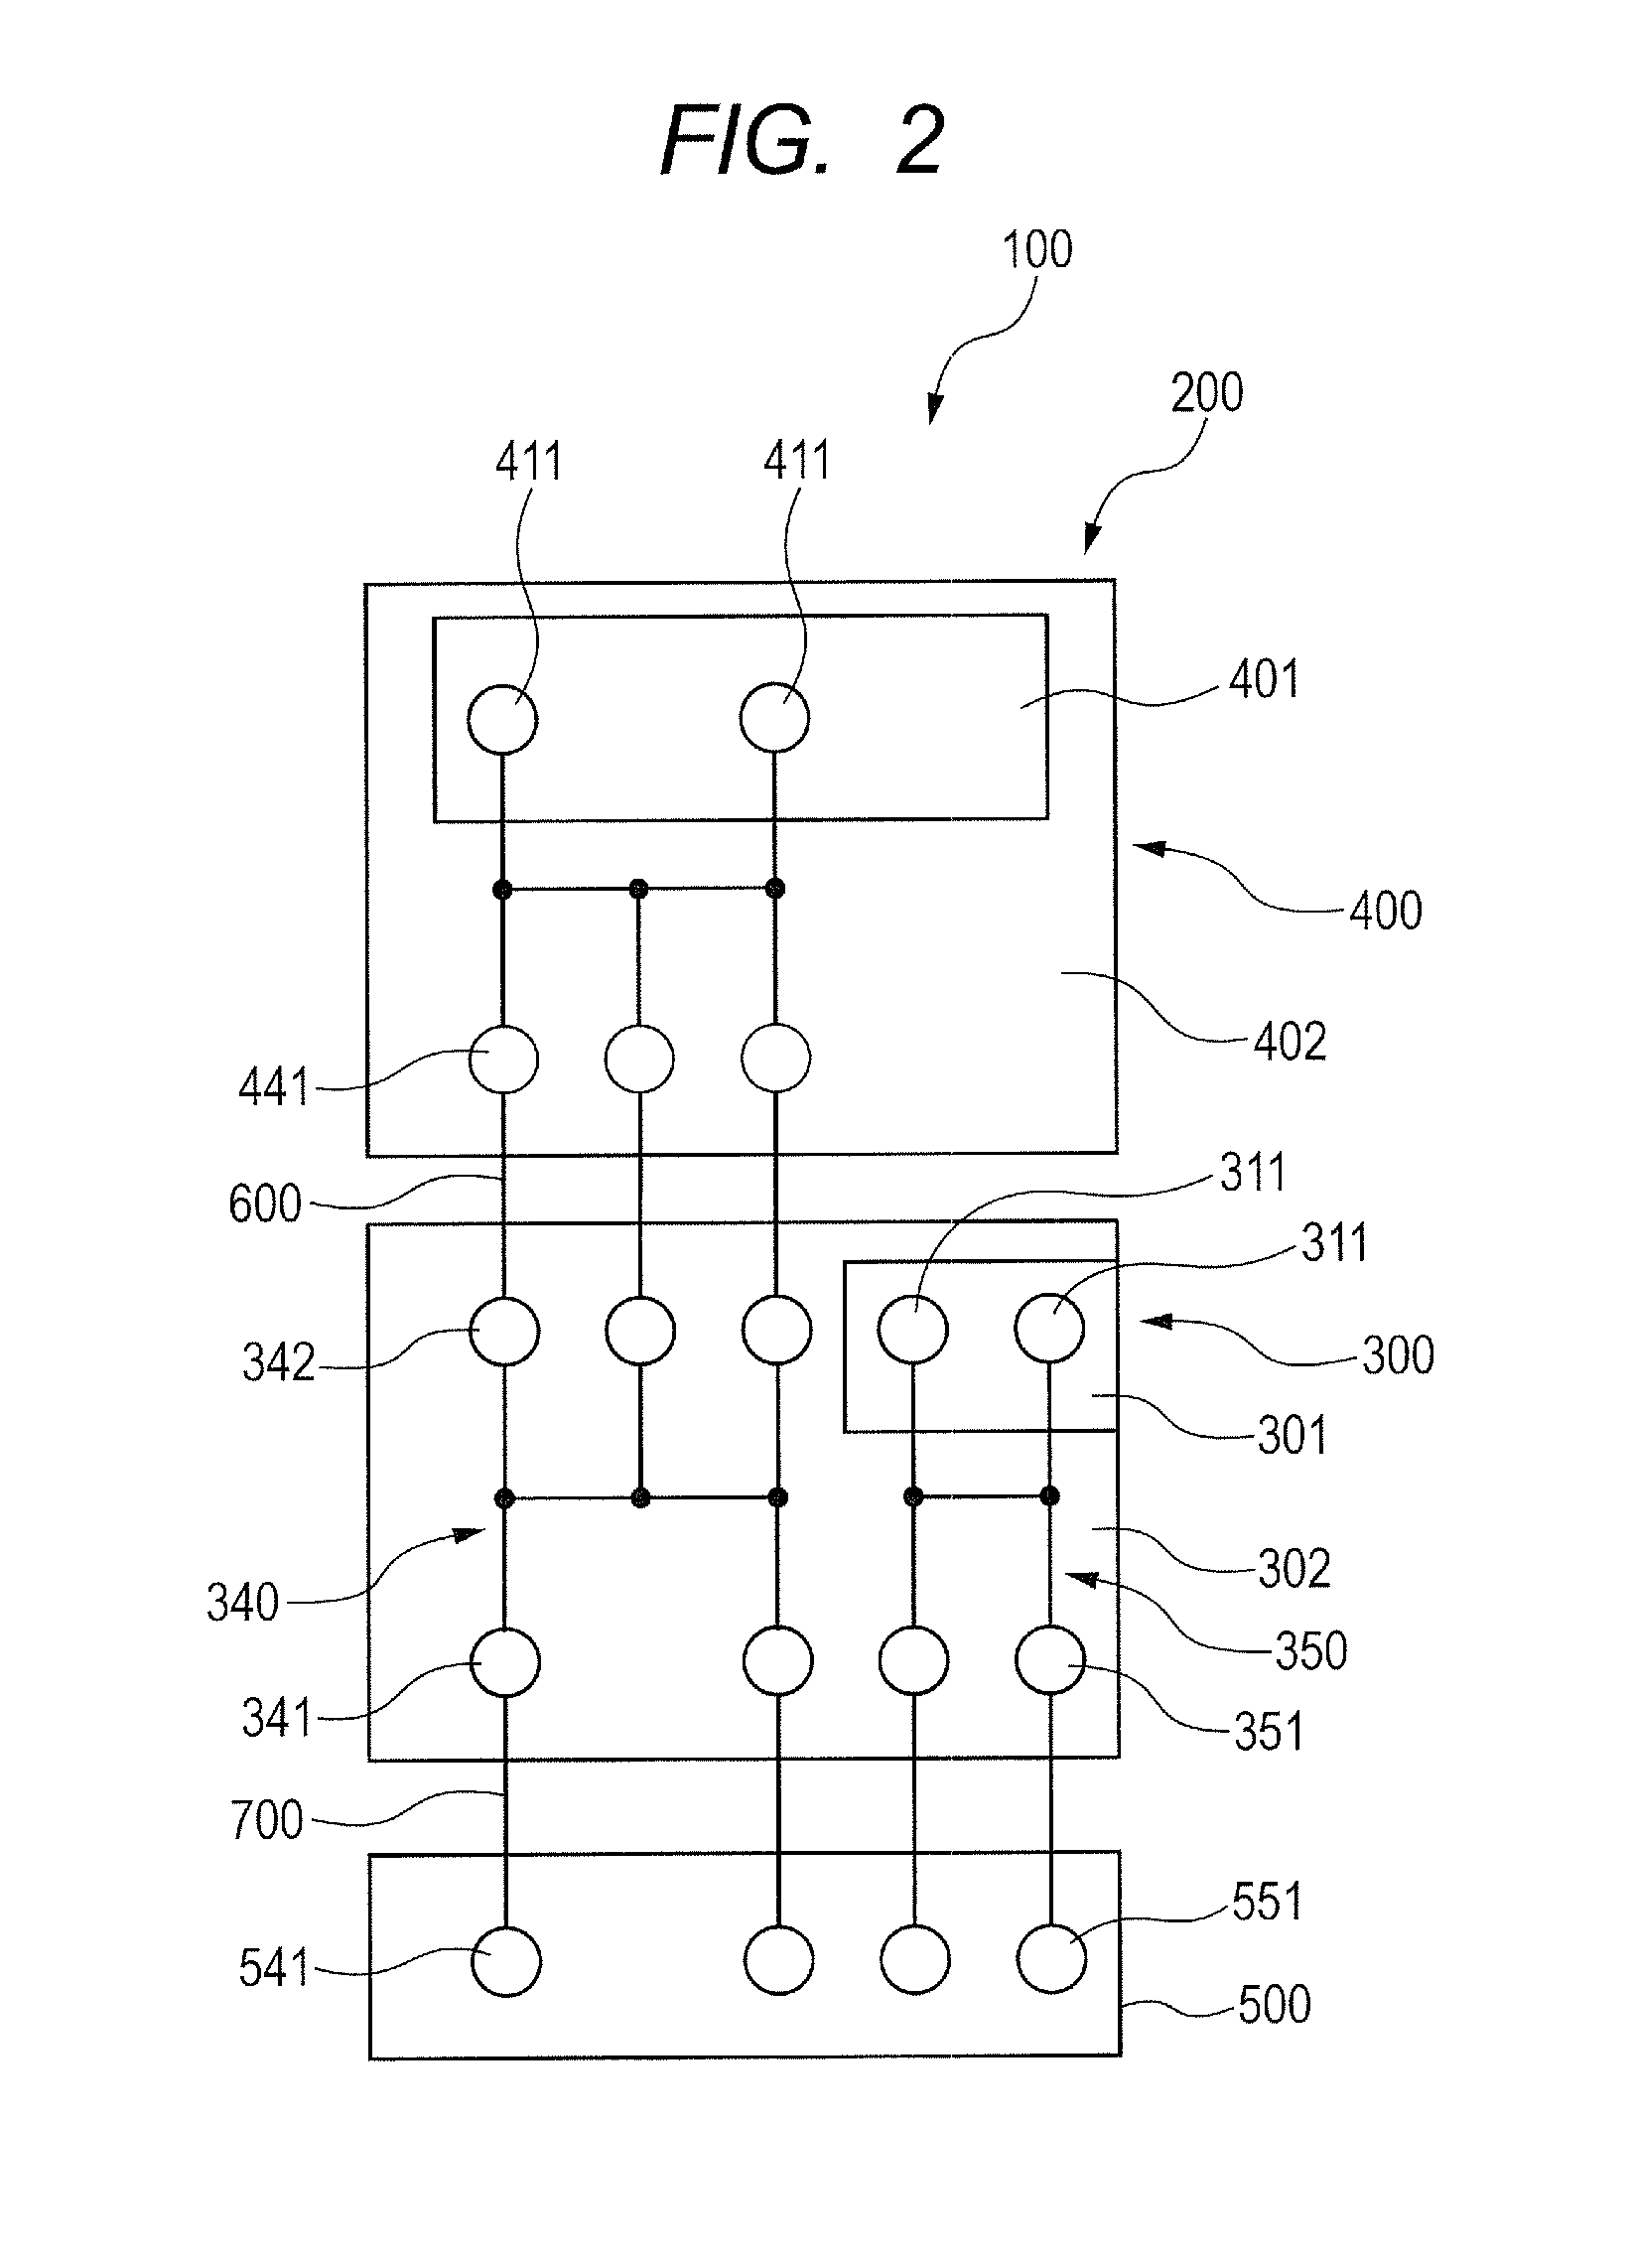 Stacked semiconductor device and printed circuit board